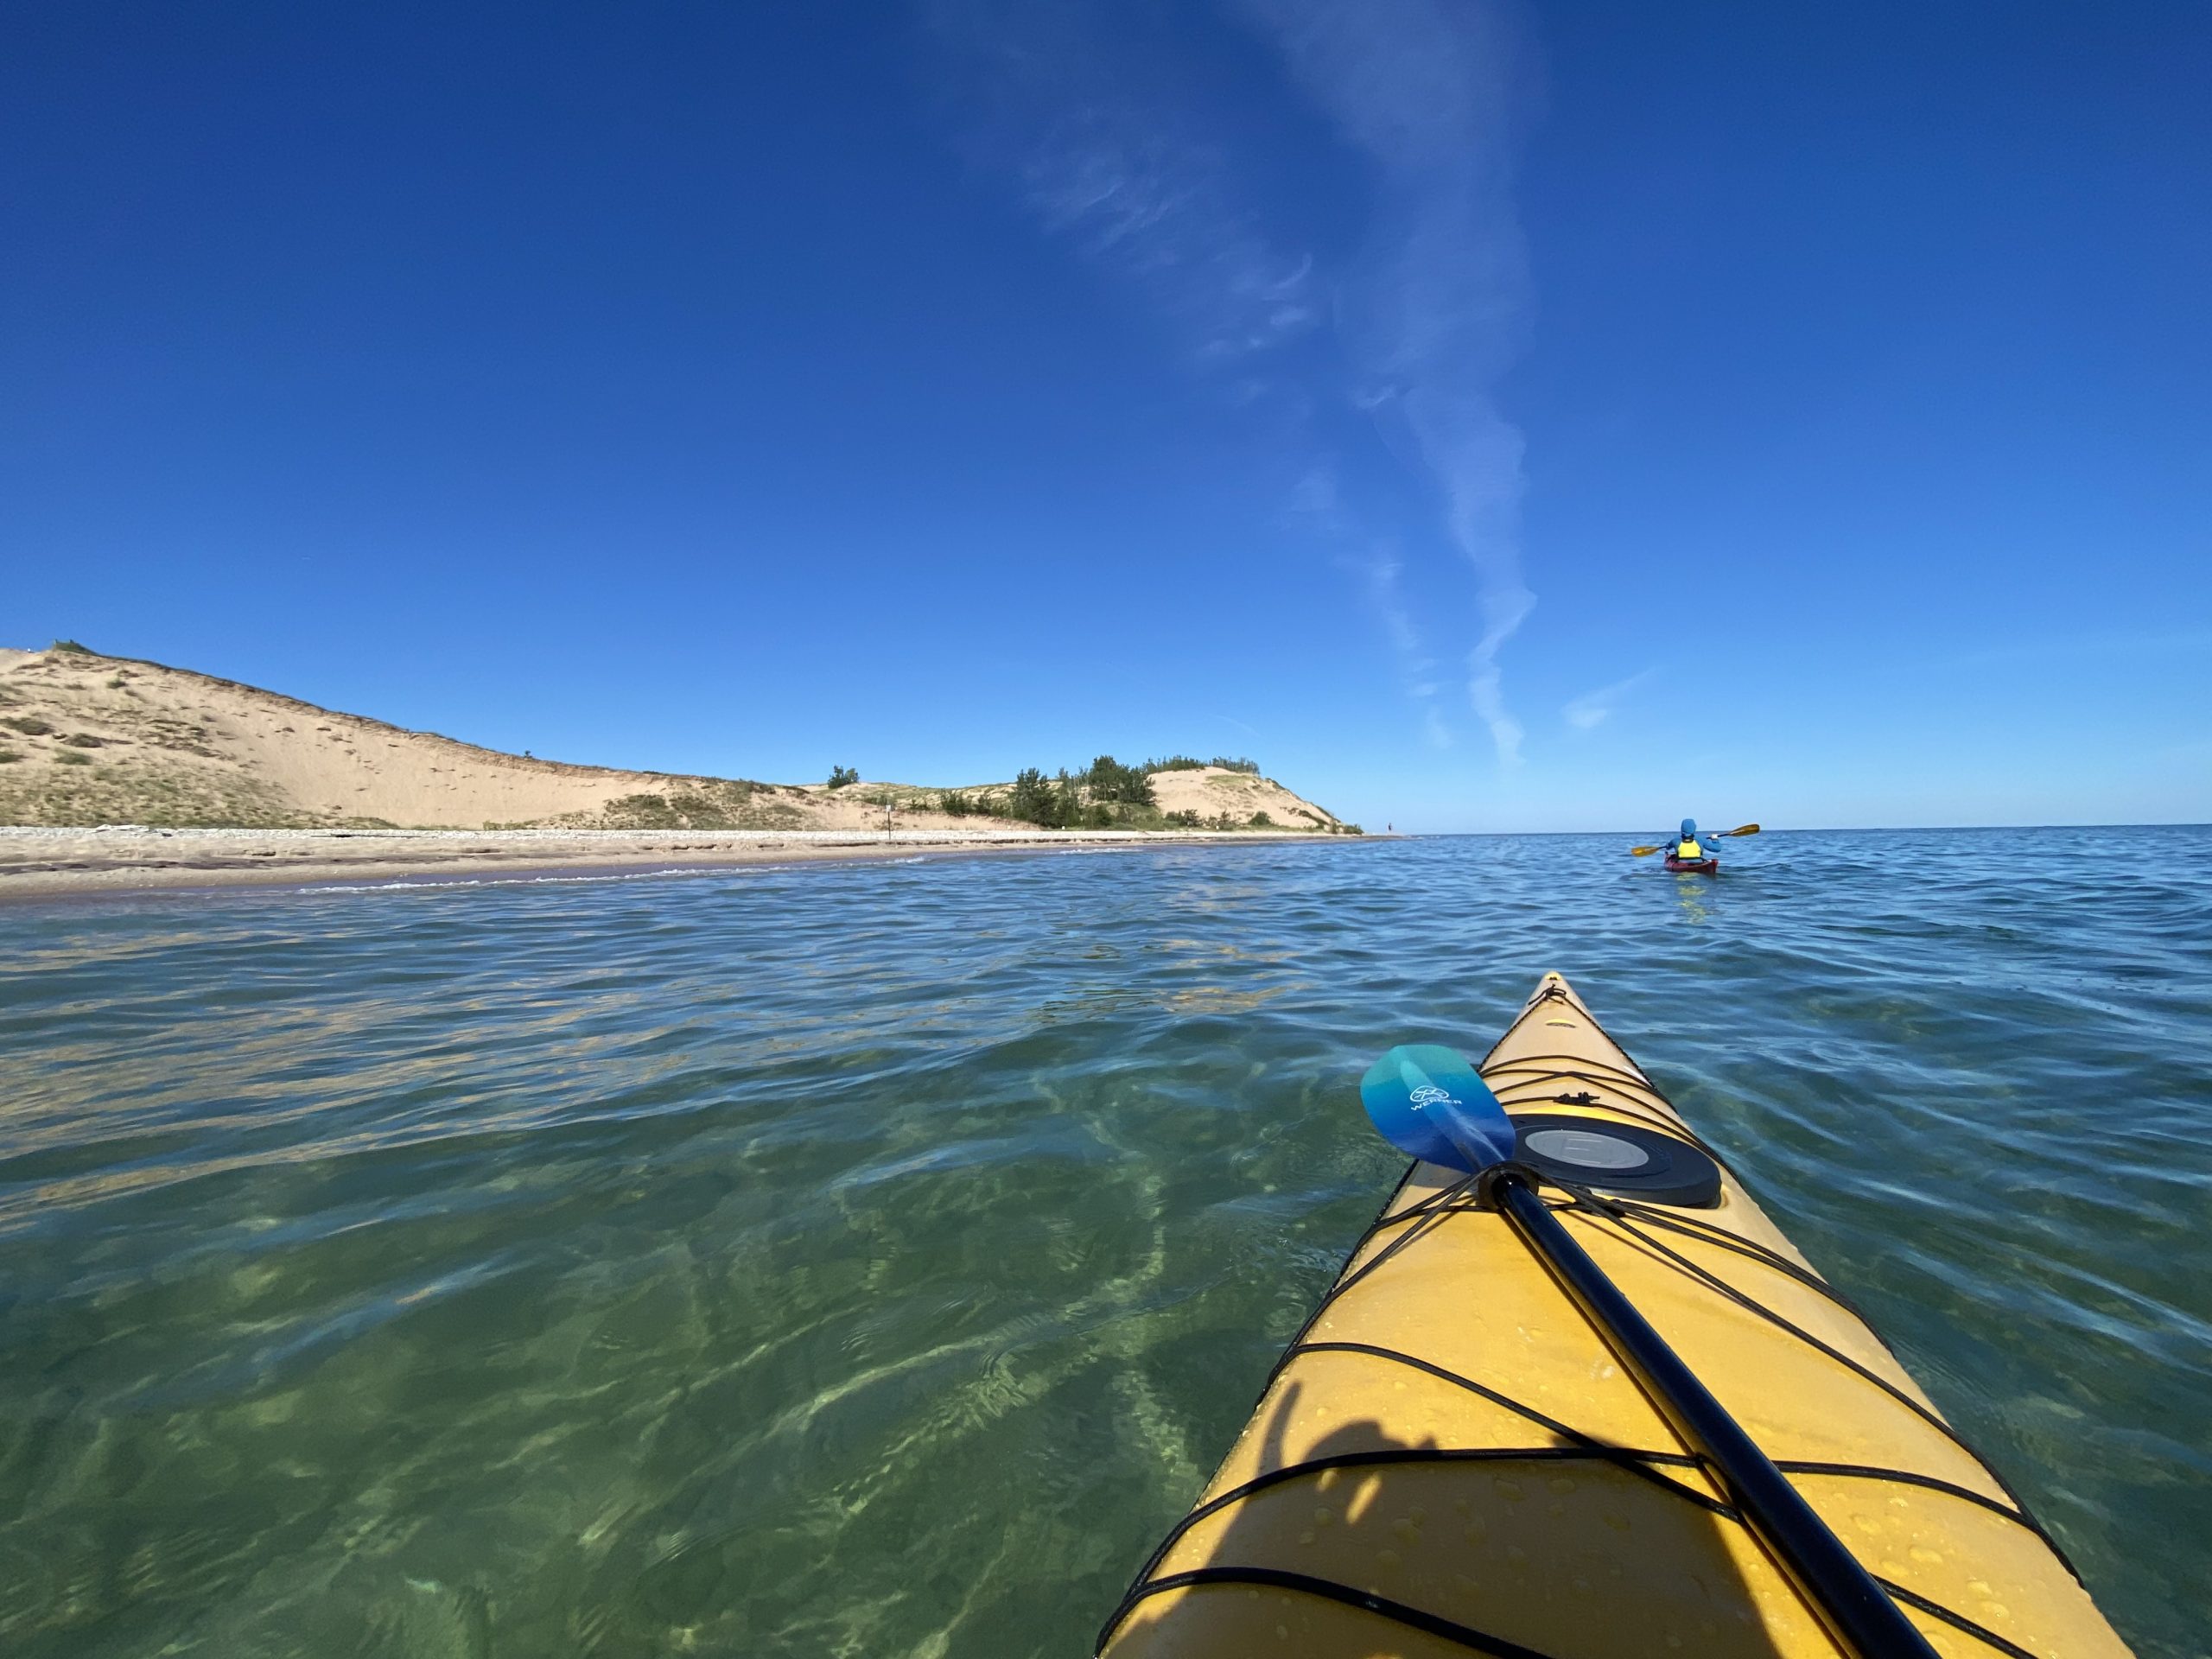 Kayaking in Lake Michigan at the Sleeping Bear Sand Dunes on a bright sunny day